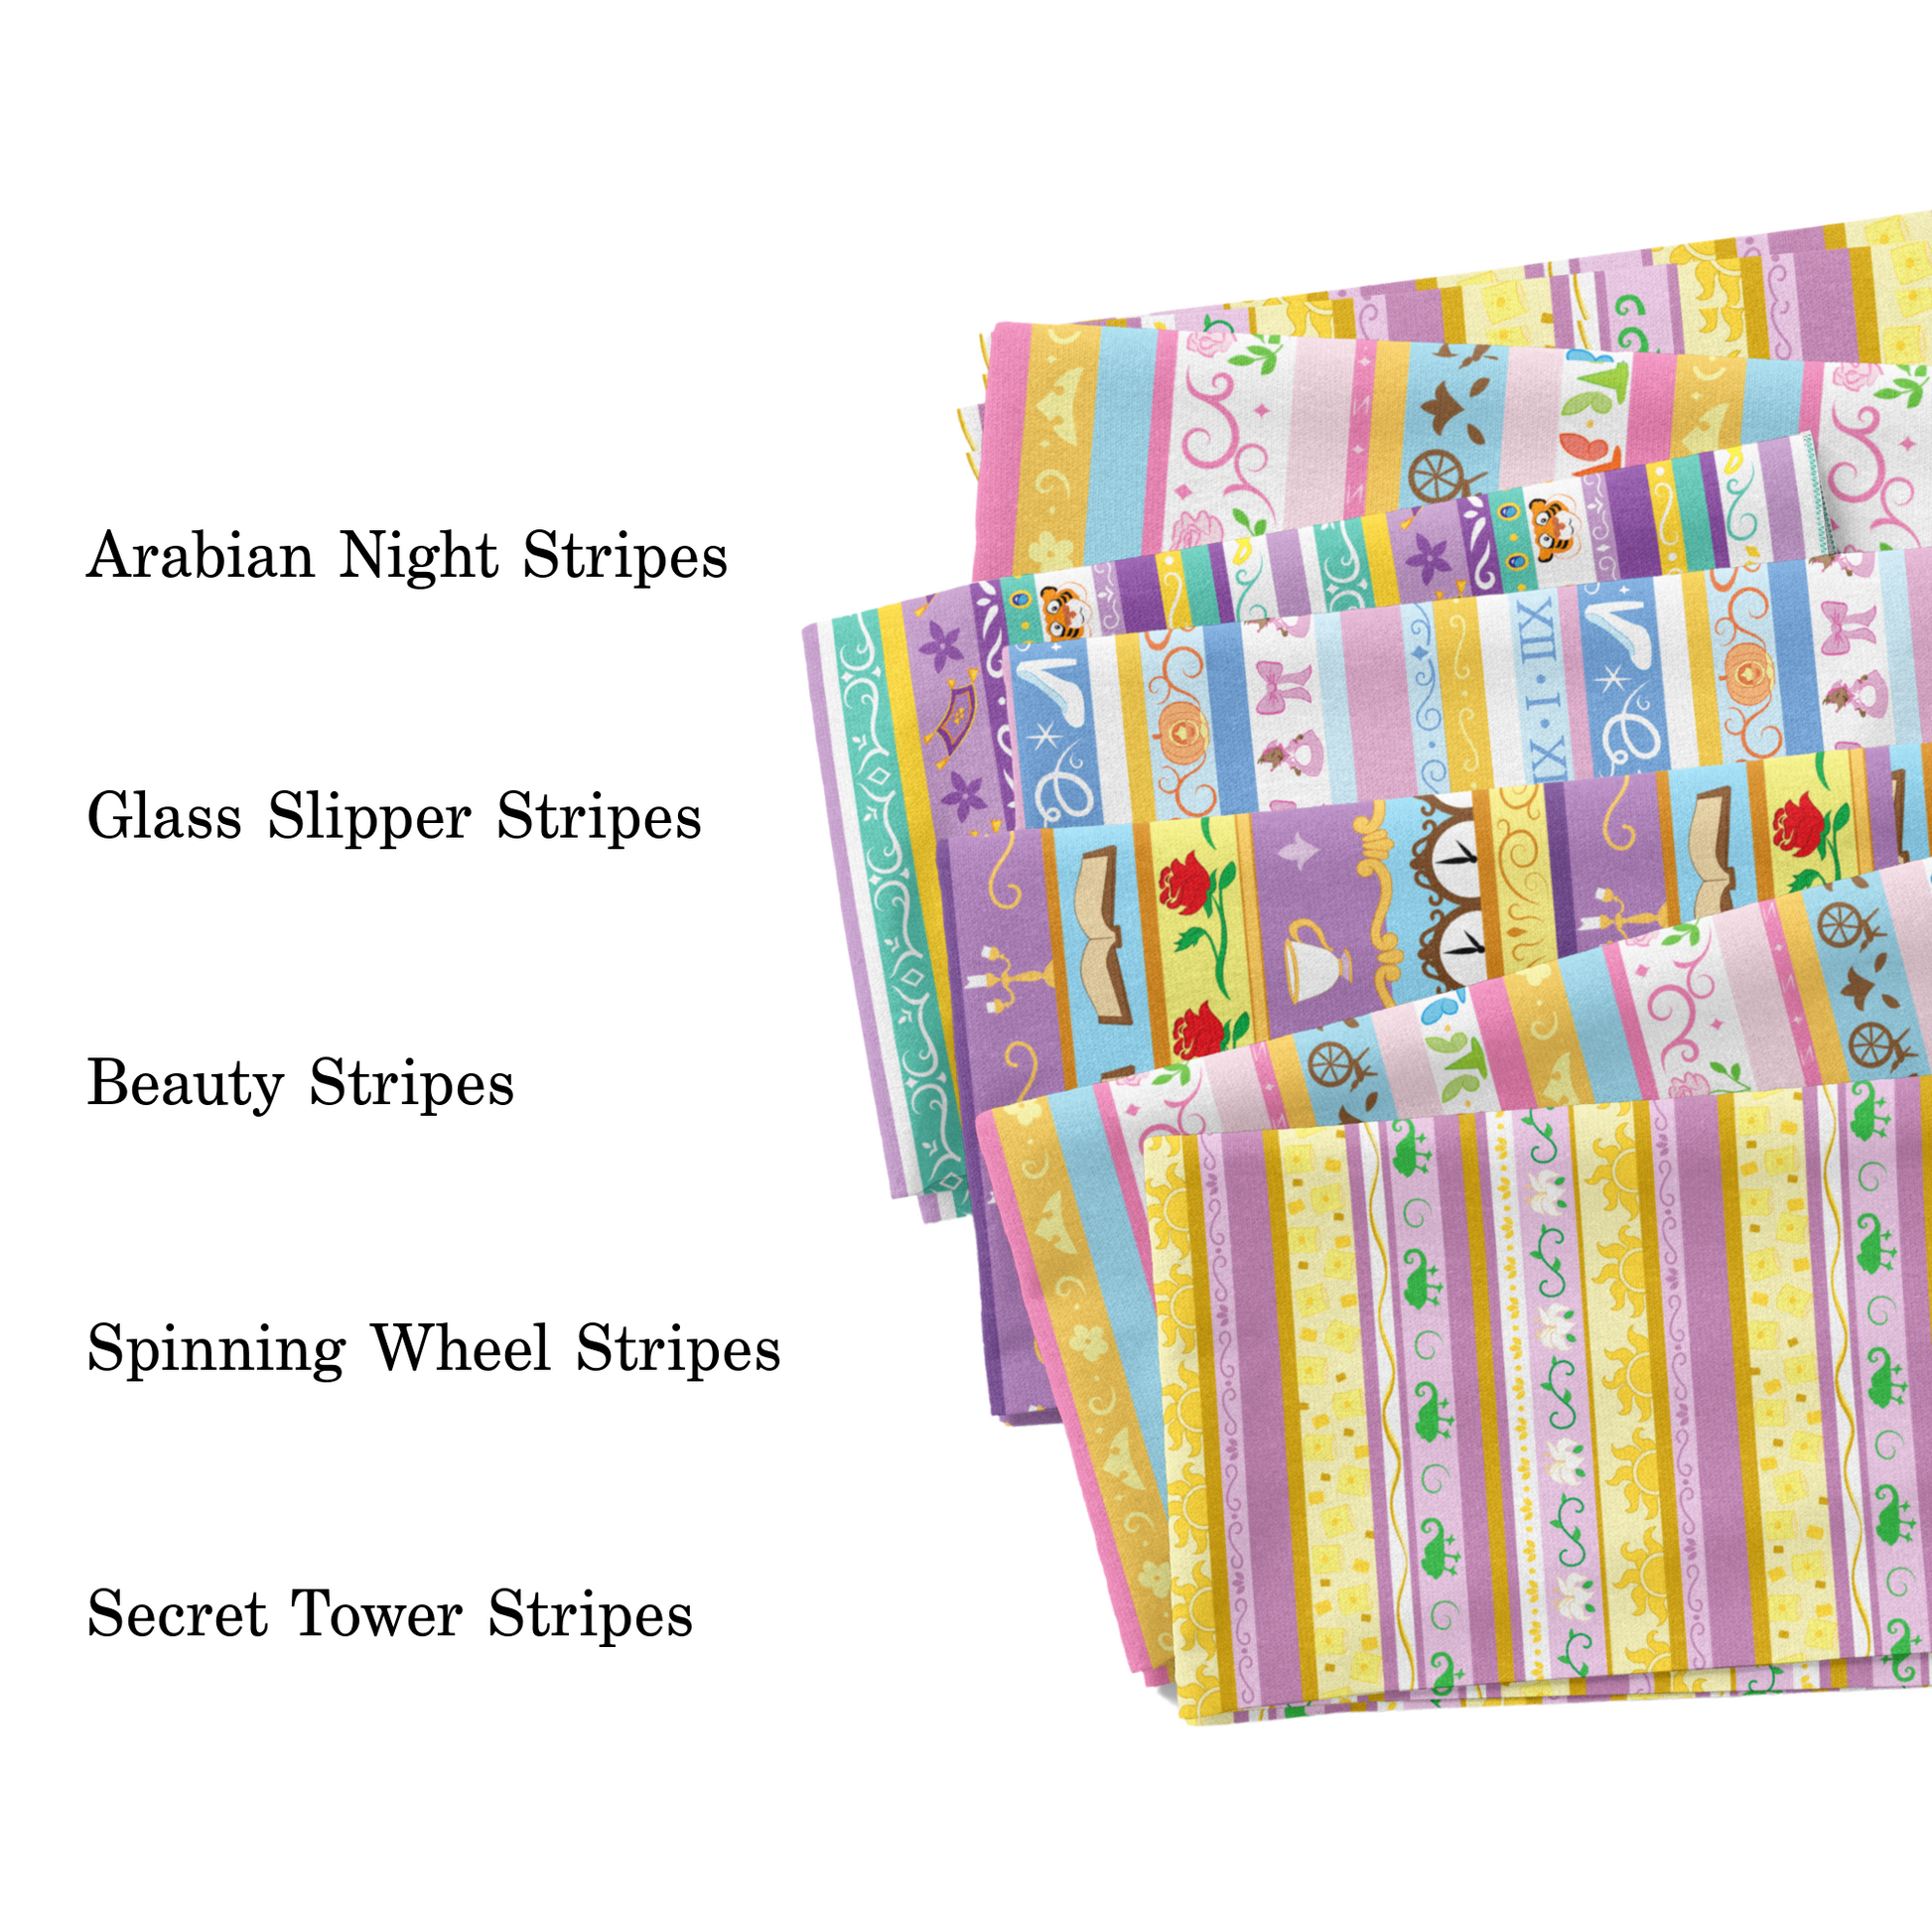 Pip supply 2023 striped princess collection fabric swatches.